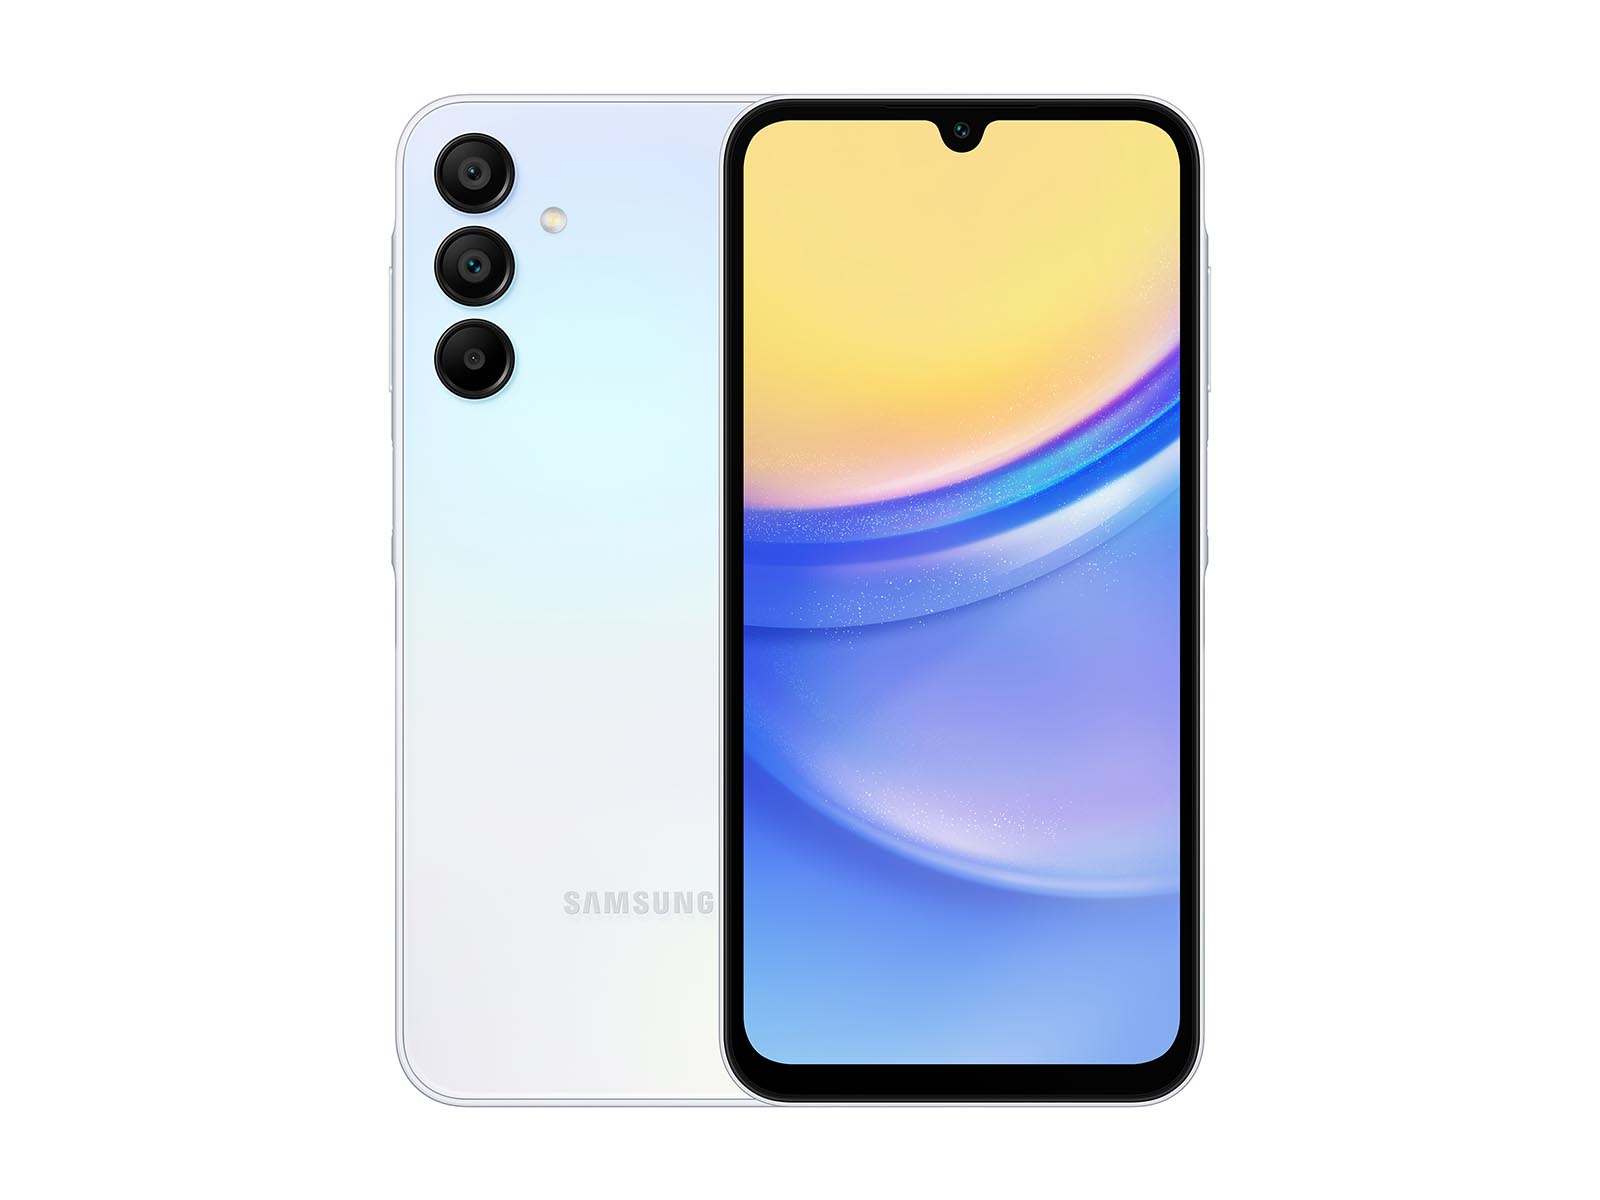 Samsung Galaxy A15 5G Hits Another Leak Foray; Specs & Pricing Unveiled -  WhatMobile news